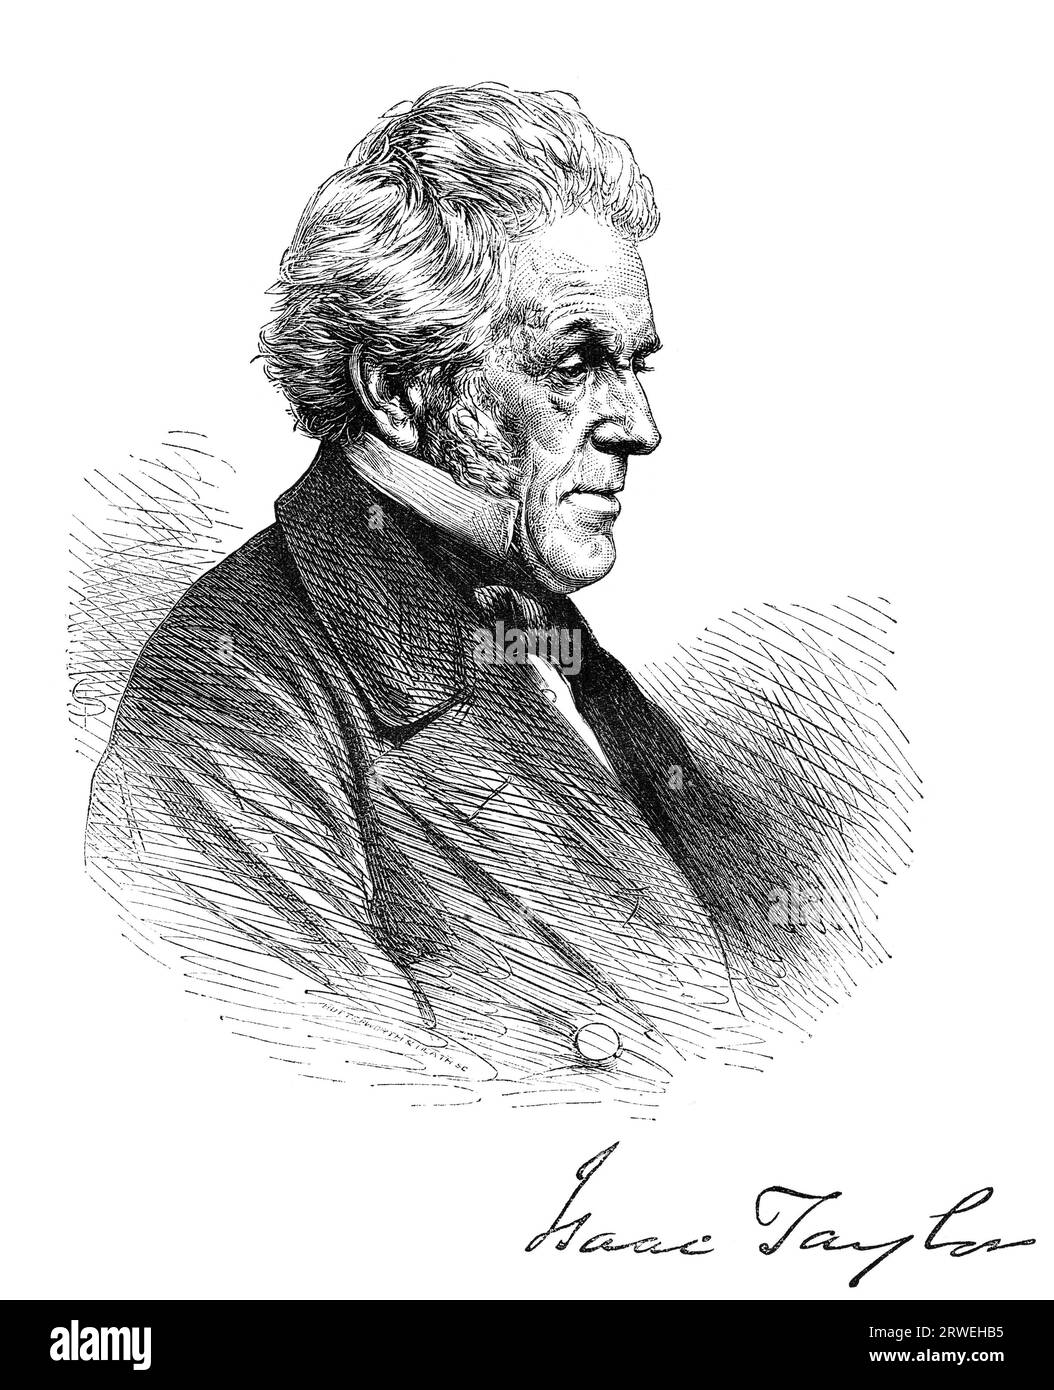 Isaac Taylor (17 August 1787 ? 28 June 1865) was an English philosophical and historical writer, artist, and inventor. Engraving from a magazine Stock Photo